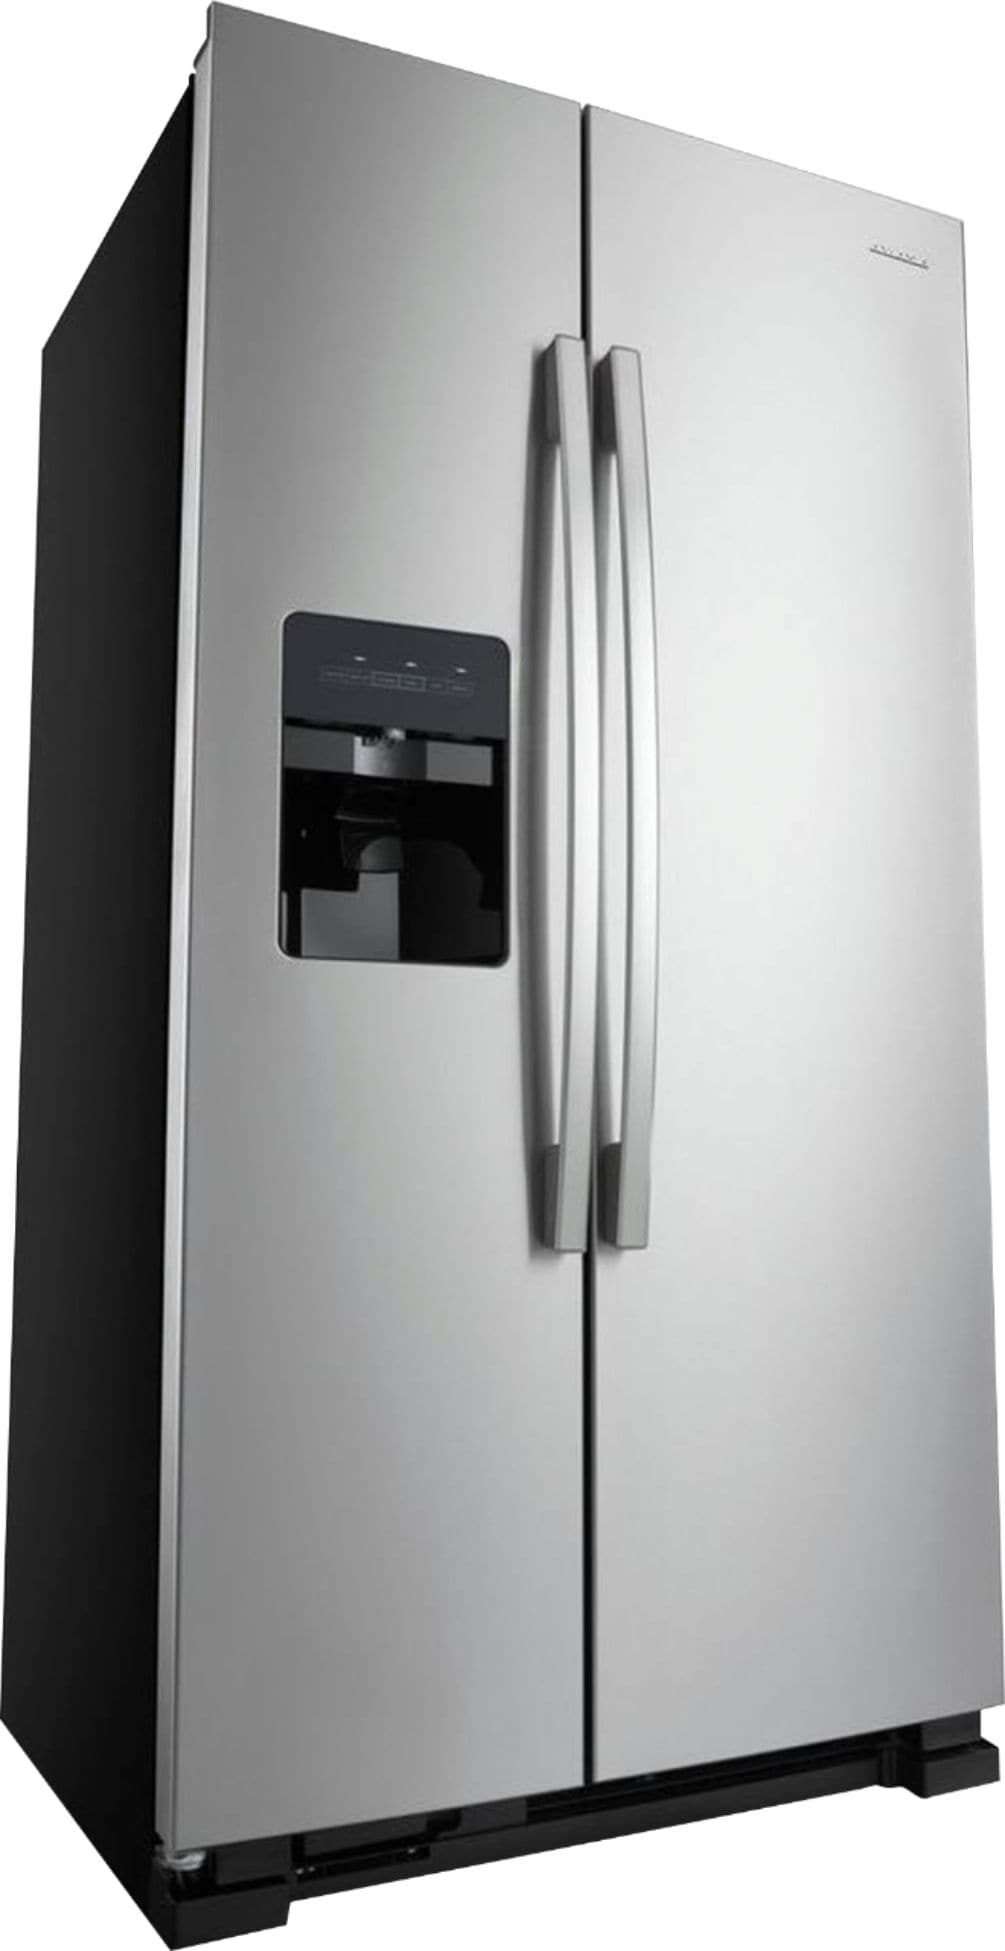 Amana - 21.4 Cu. Ft. Side-by-Side Refrigerator - Stainless steel_1